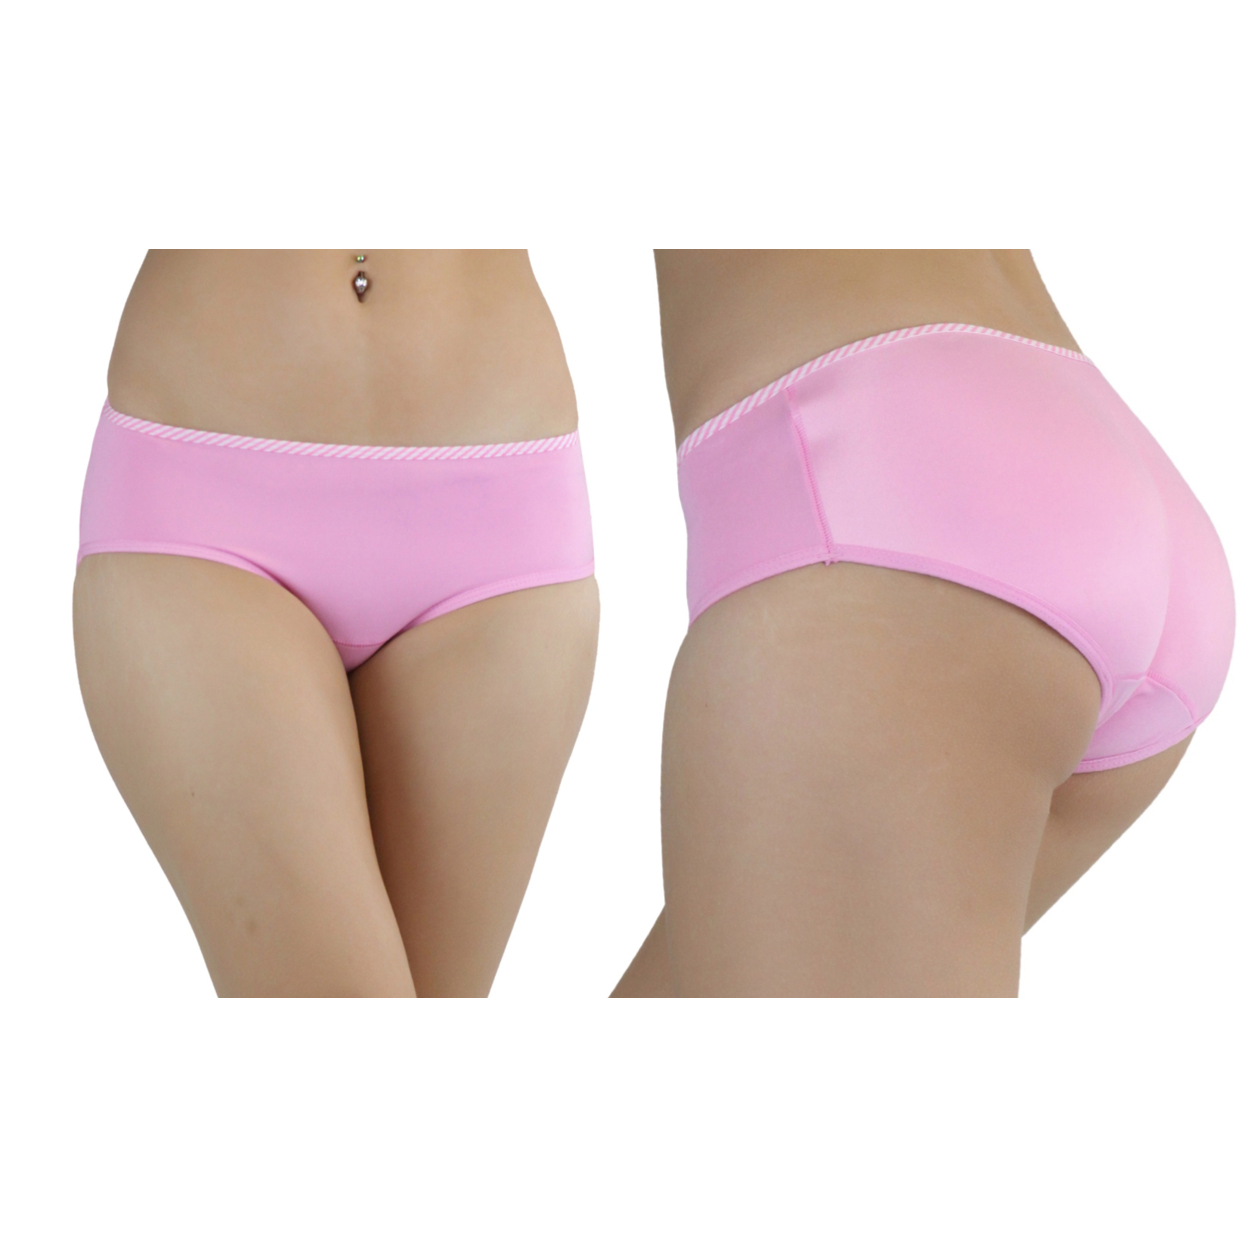 Women's Instant Booty Boosters Padded Panty - Pink, M